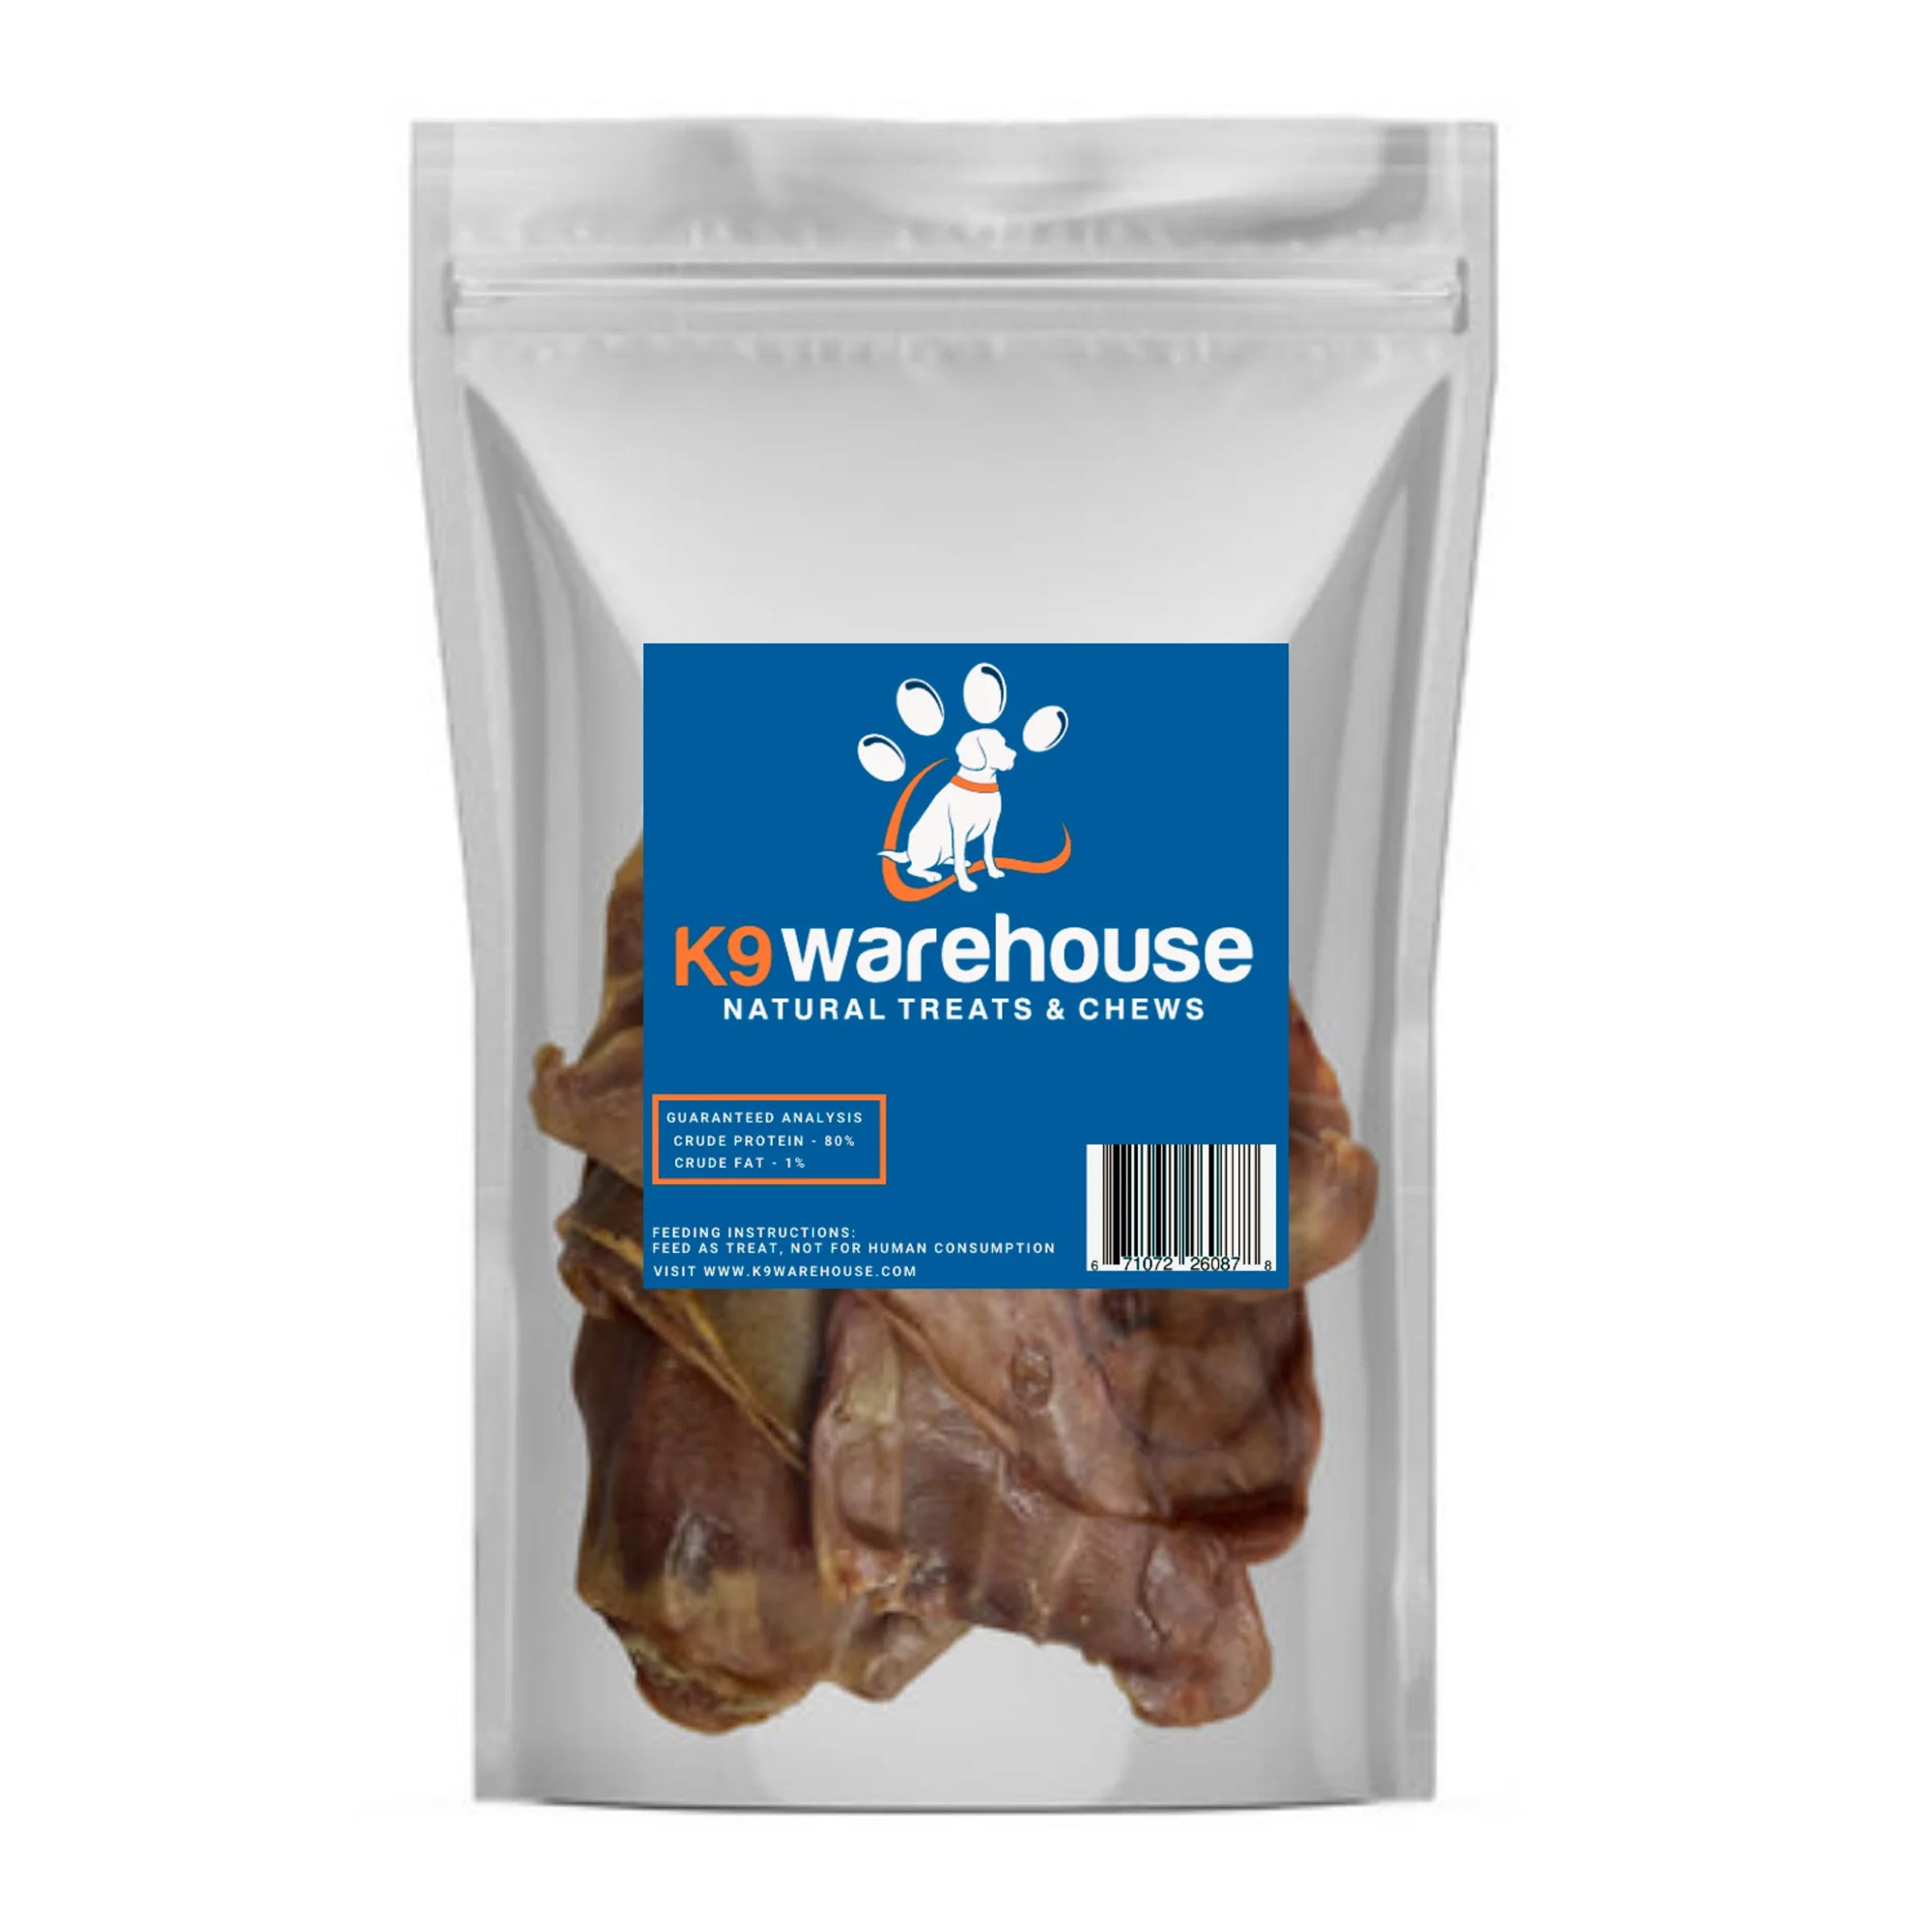 Pig Ears - 6 Count - Pig Ears - 6 Count - K9warehouse.com